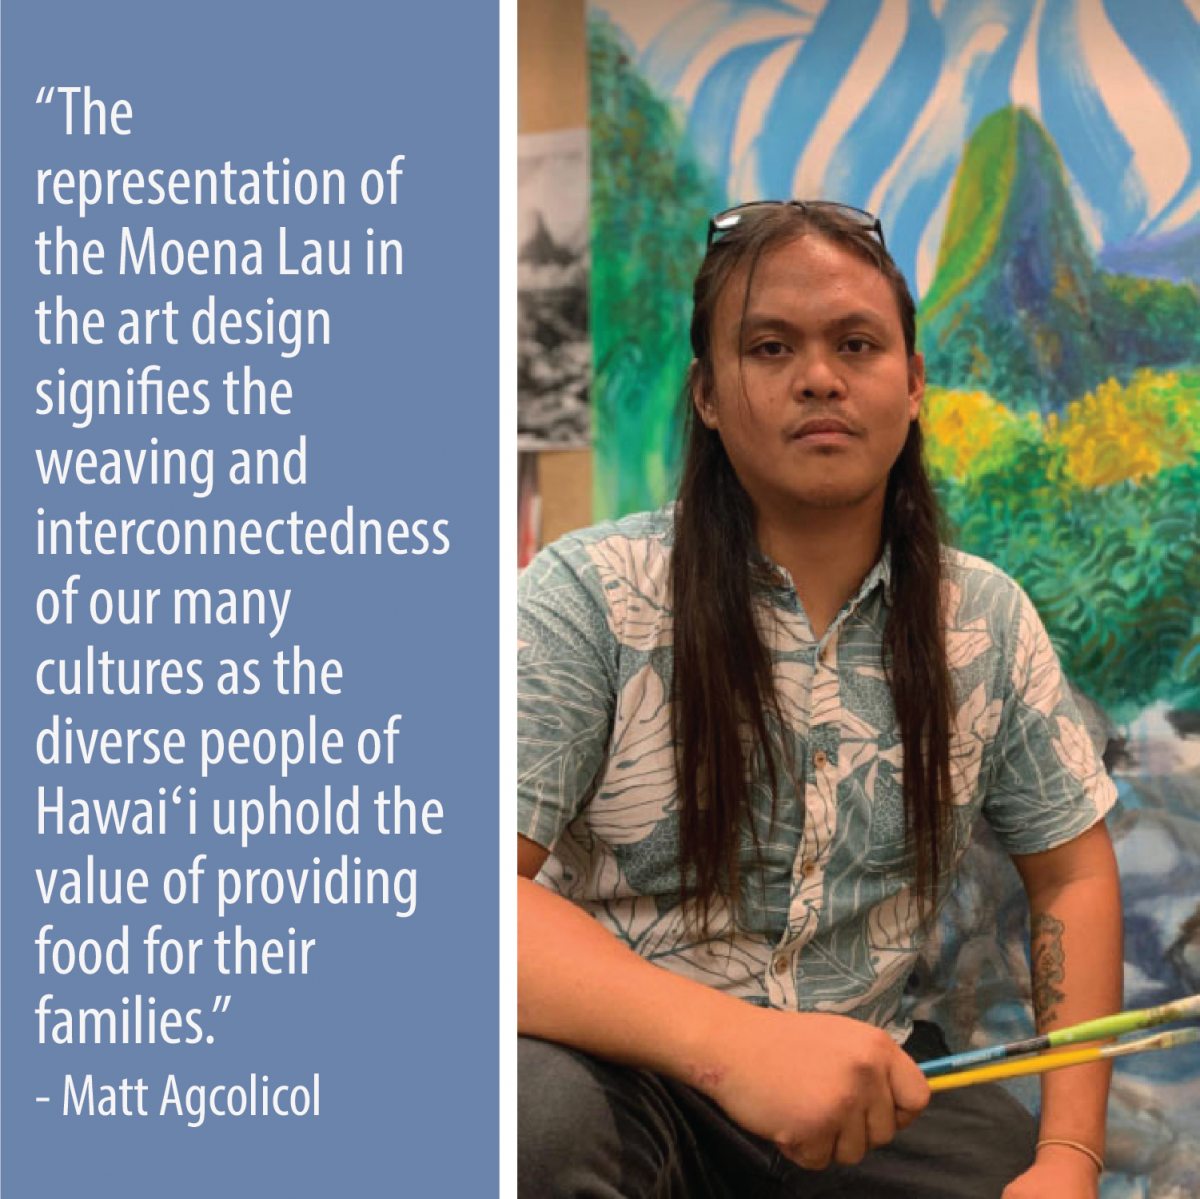 The representation of the Moena Lau in the art design signifies the weaving and interconnectedness of our many cultures as the diverse people of Hawai'i uphold the value of providing food for their families.  -Matt Agcolicol